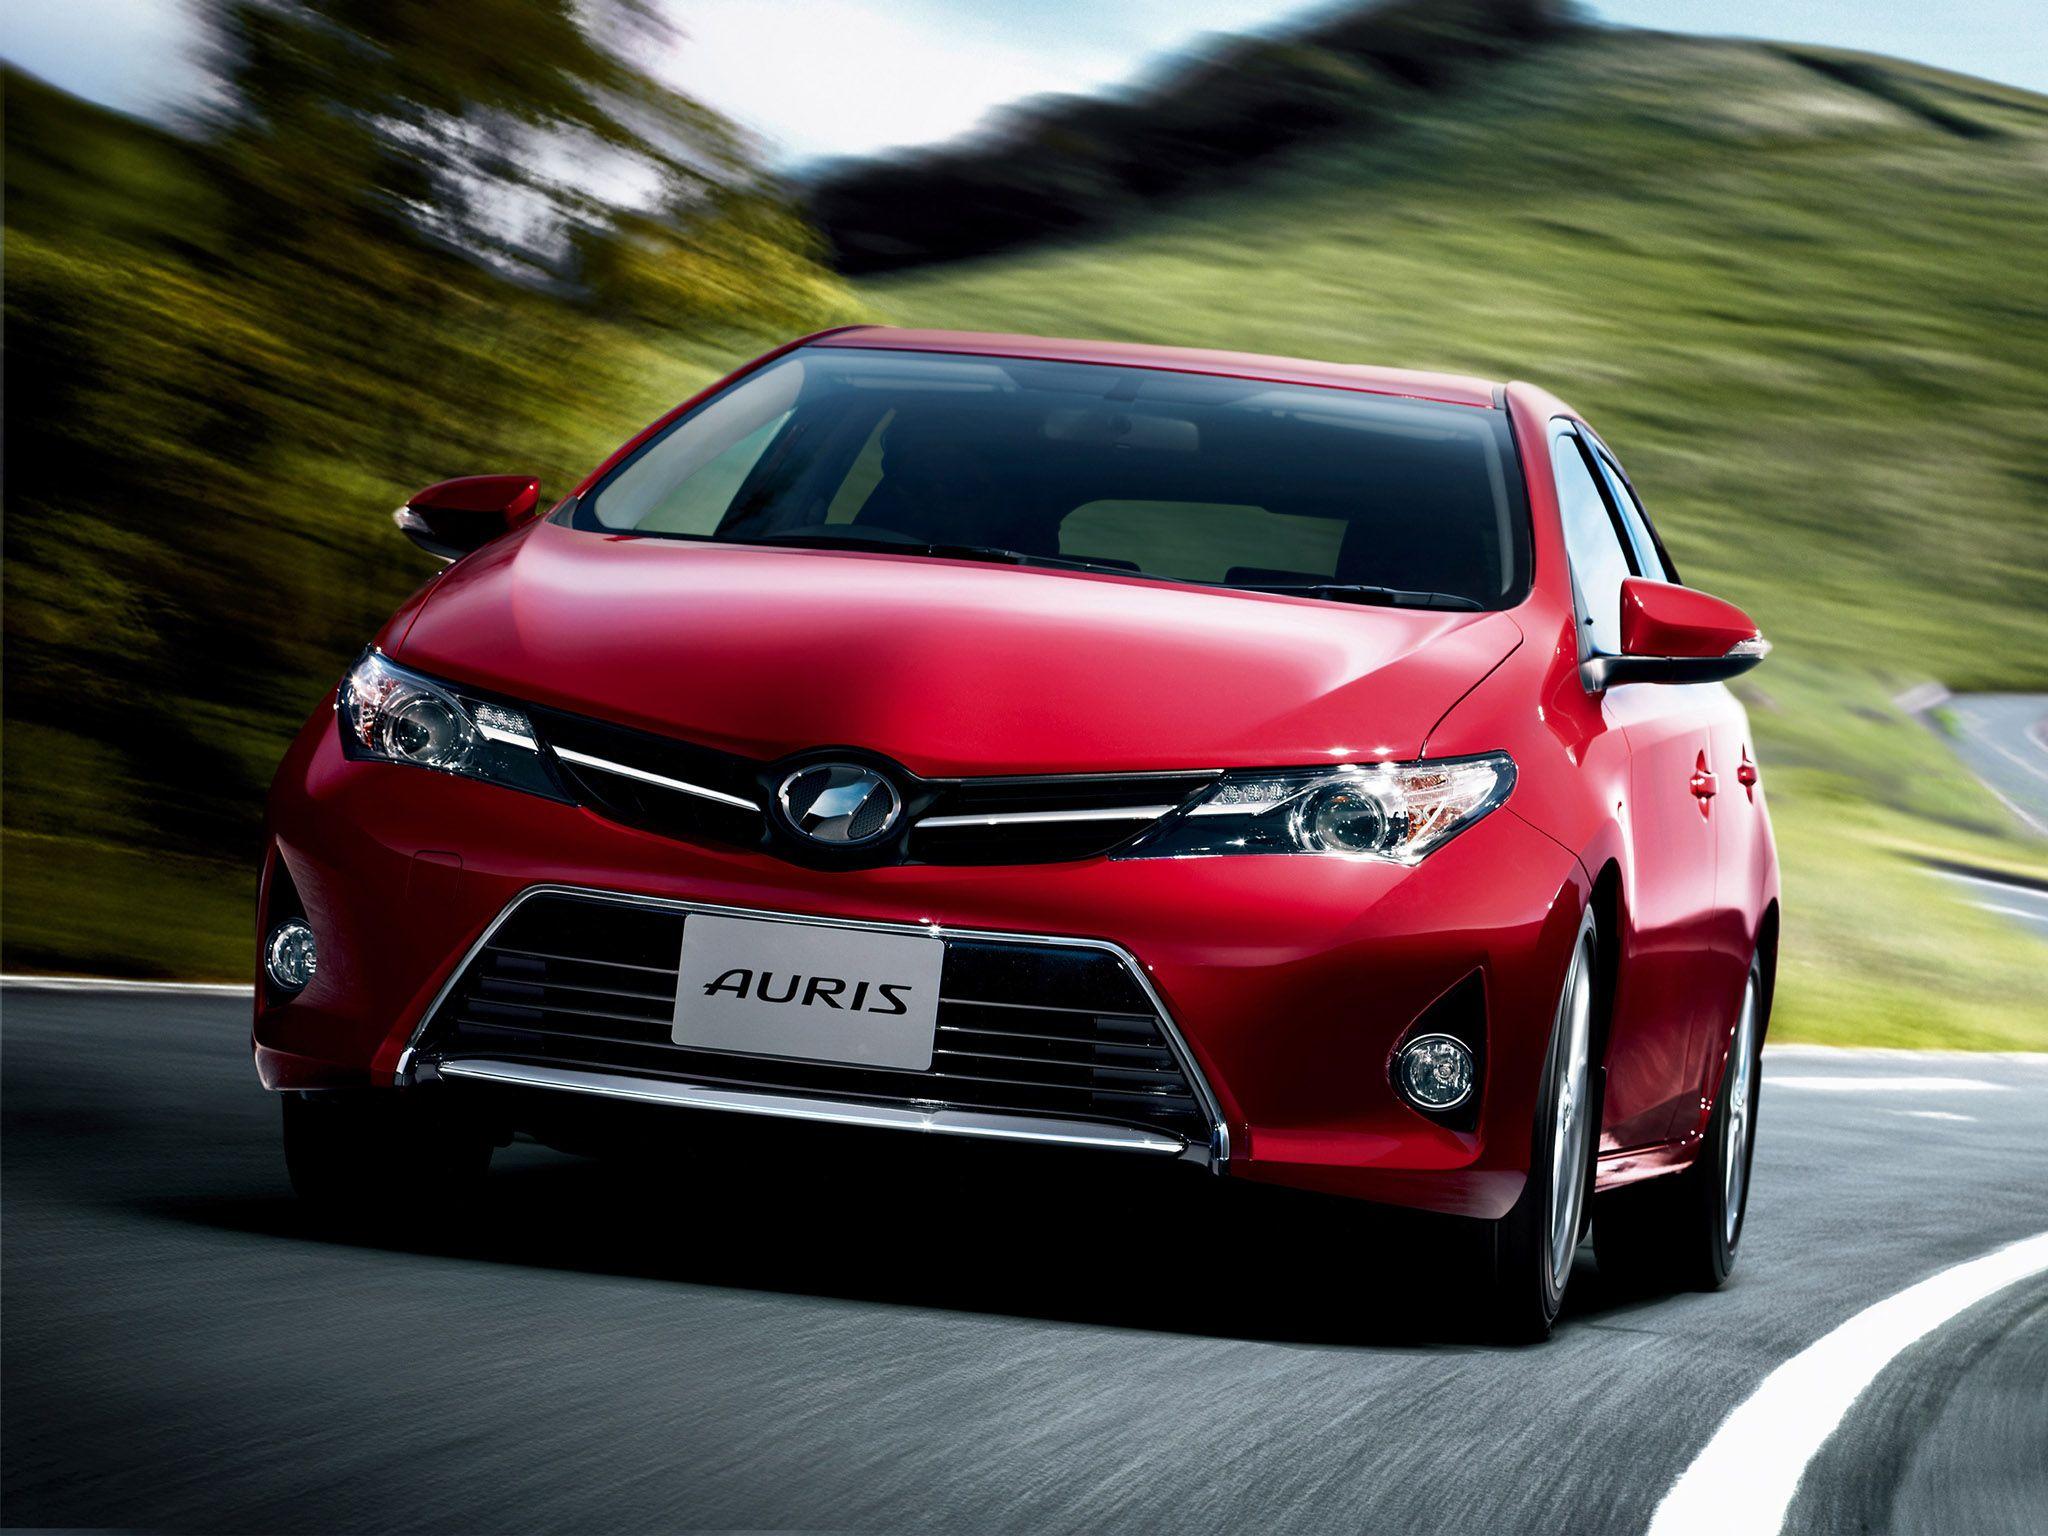 Toyota Auris Wallpapers Group with items